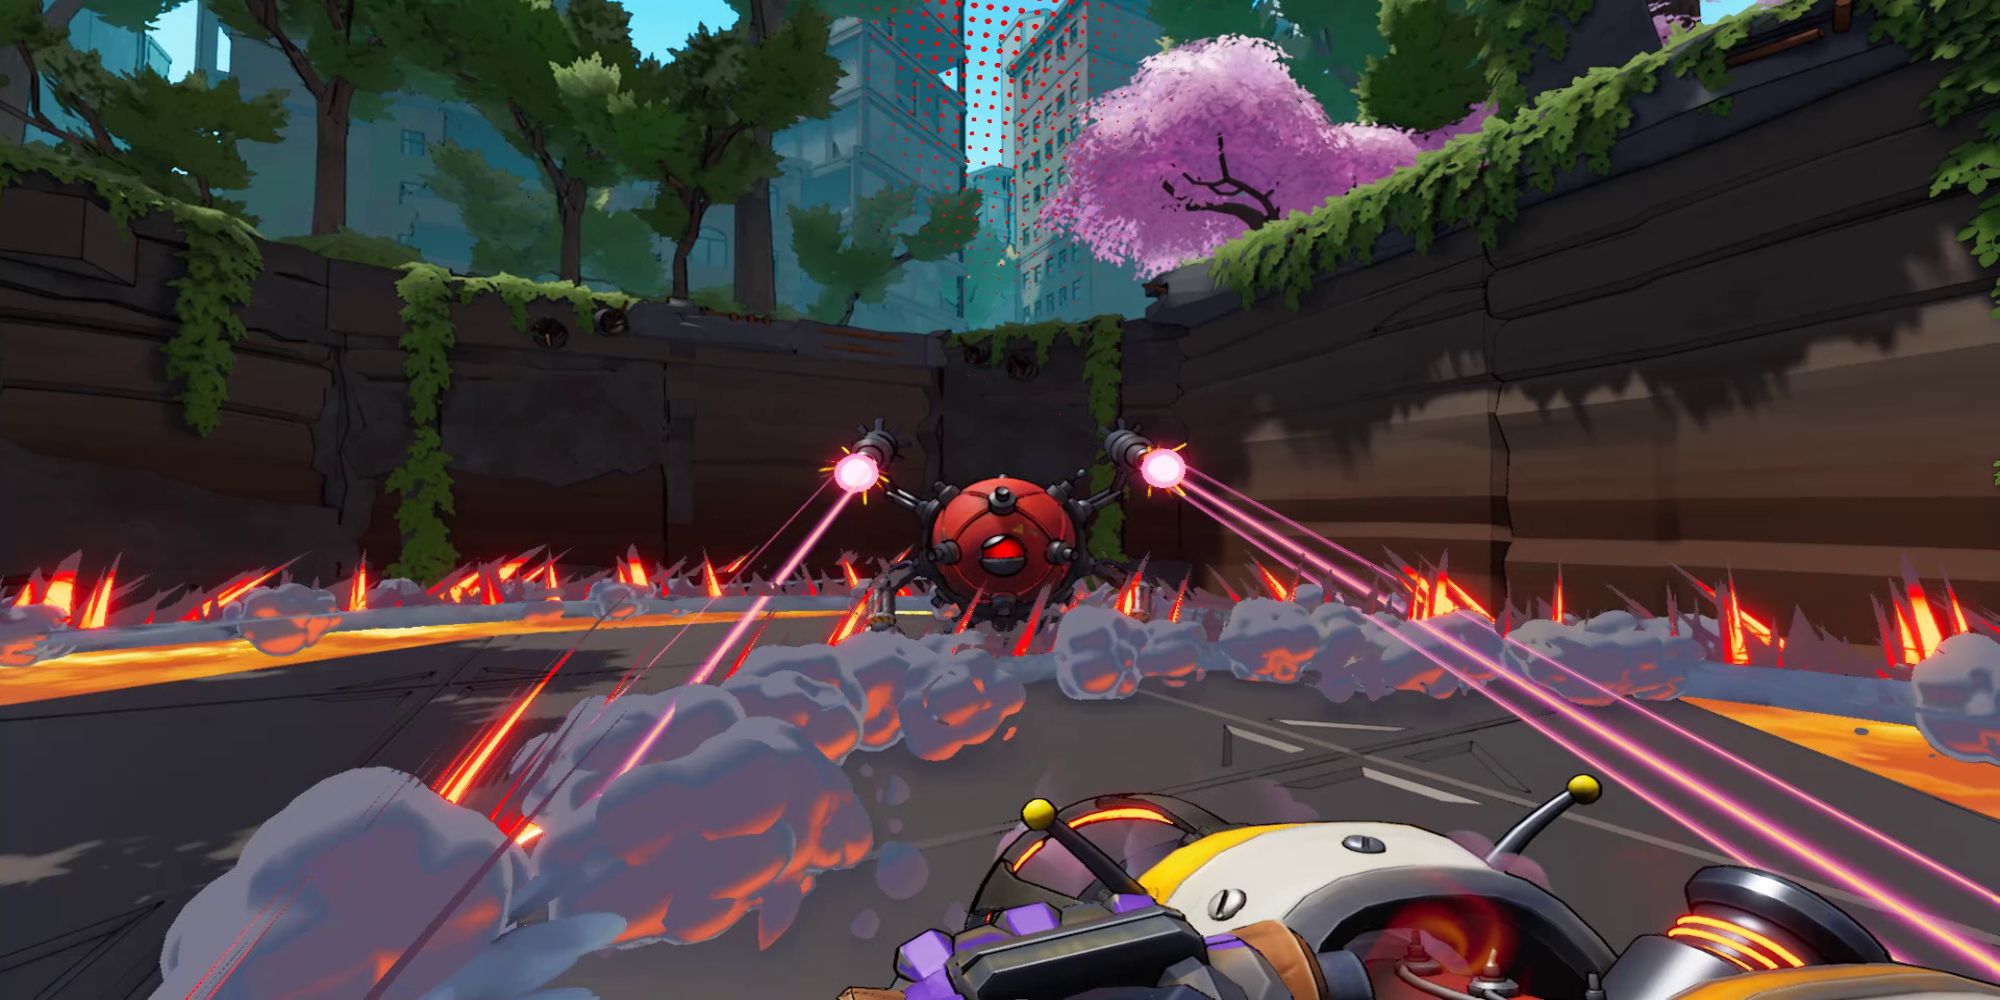 The player uses the drain affix in the middle of a battle as the enemy shoots lasers at them in Roboquest